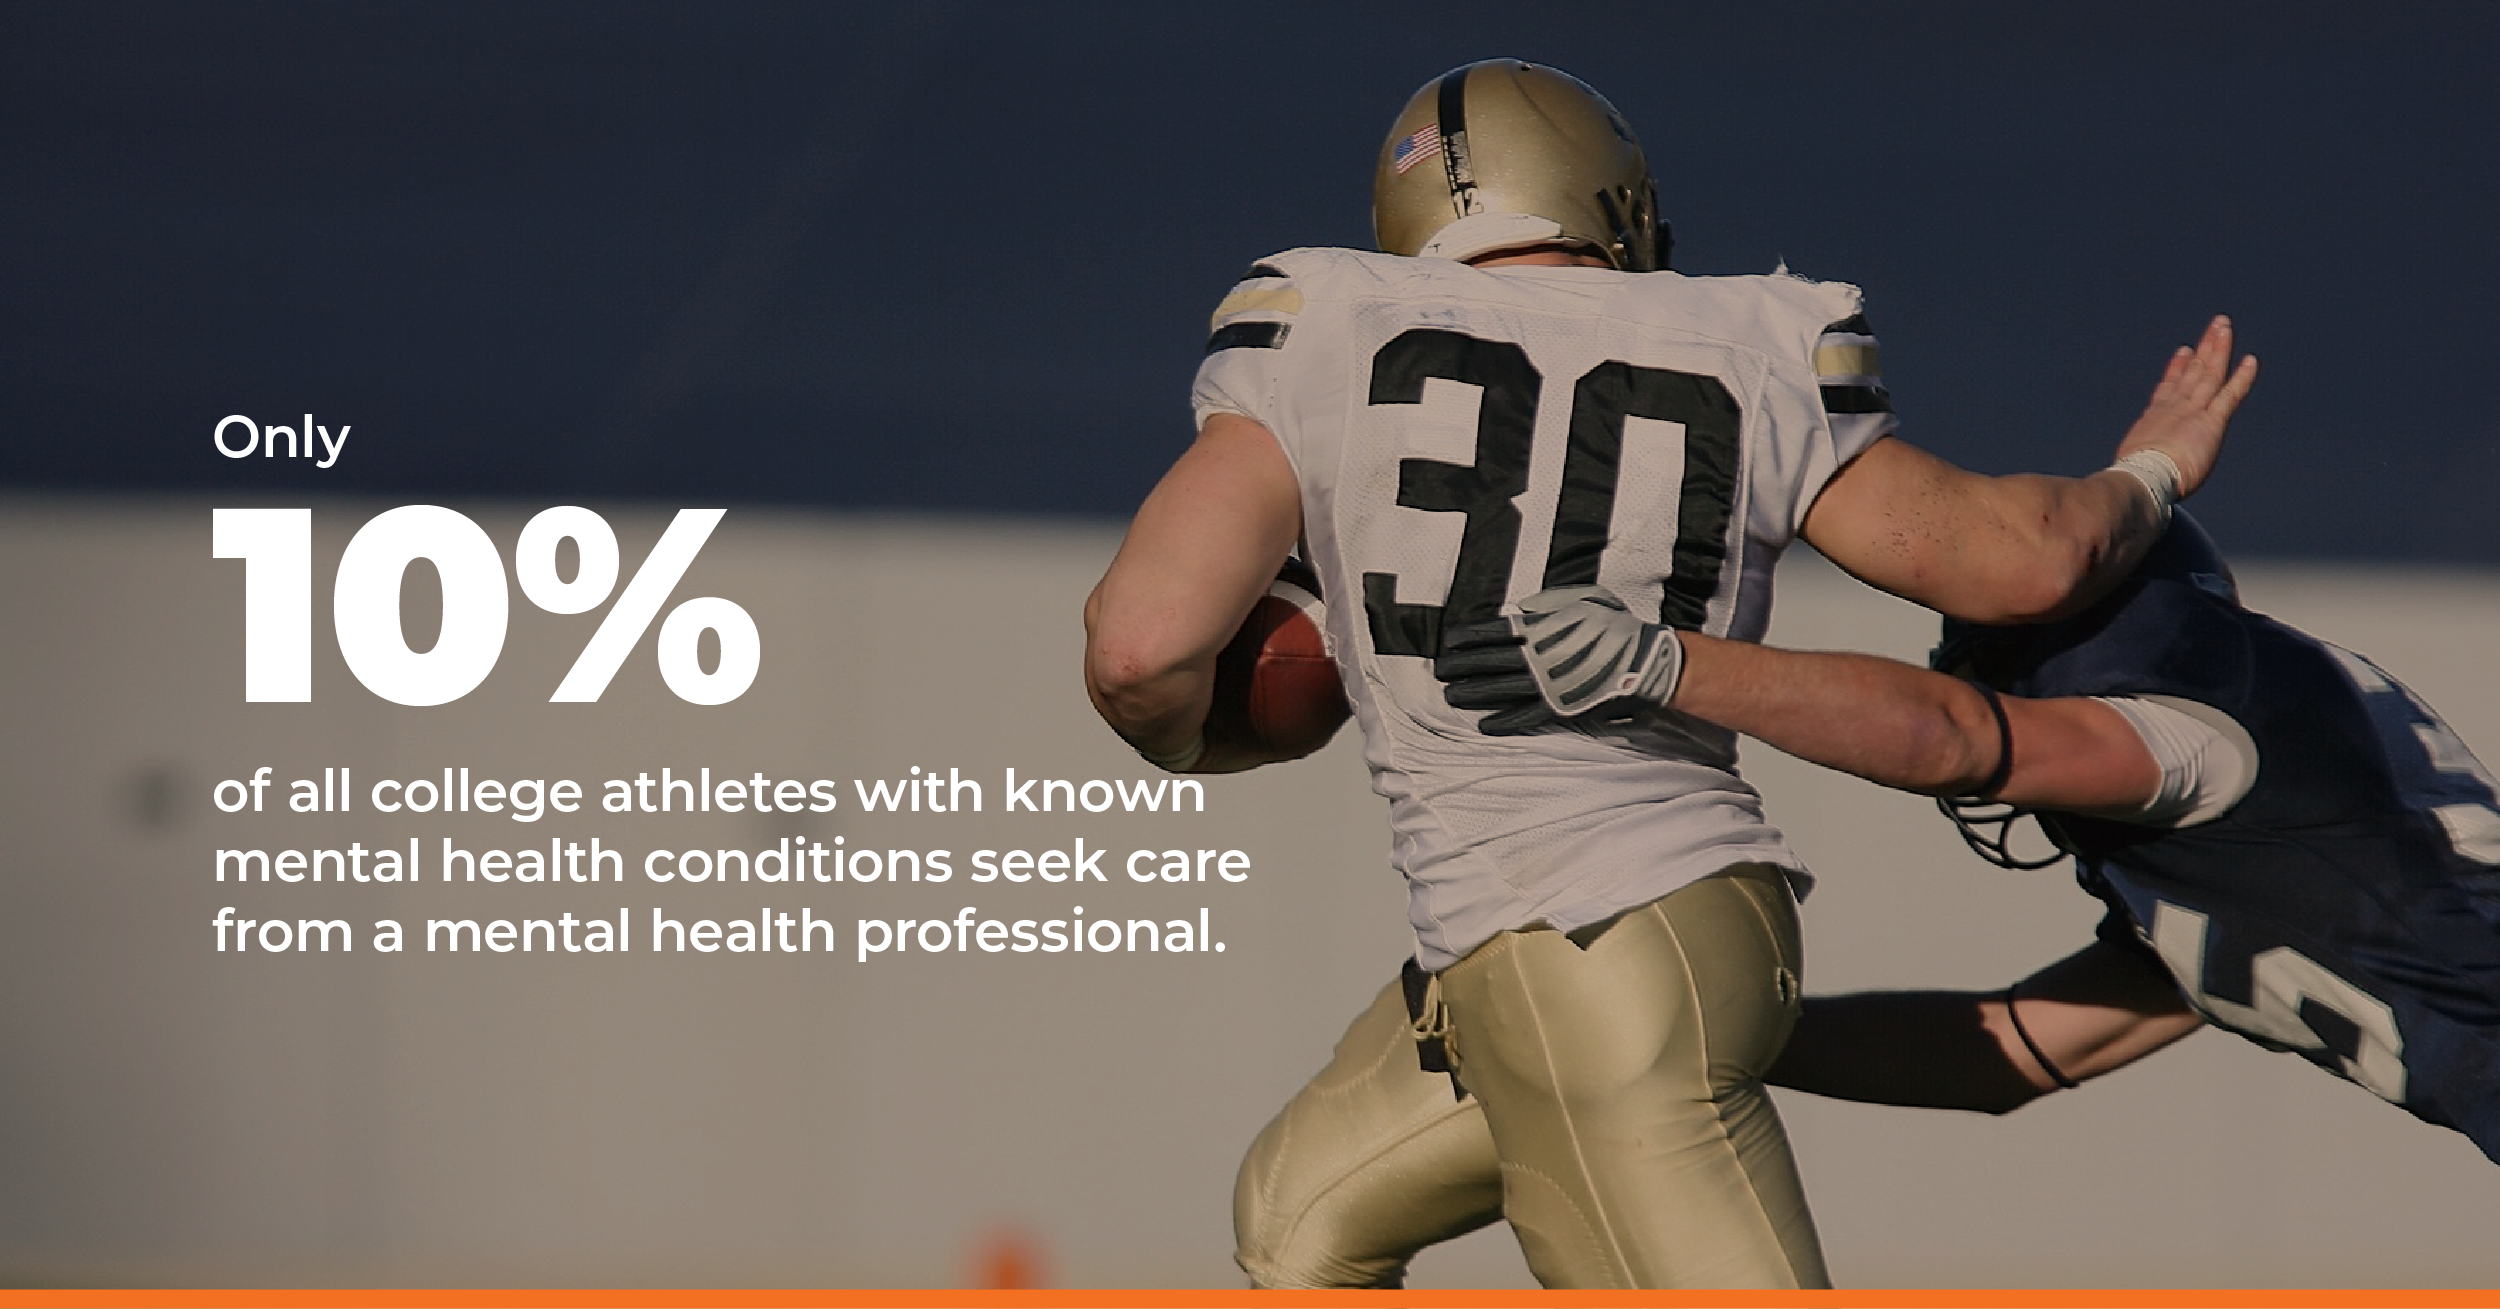 Only 10% of all college athletes with known mental health conditions seek care from a mental health professional. Source: https://www.acsm.org/news-detail/2021/08/09/the-american-college-of-sports-medicine-statement-on-mental-health-challenges-for-athletes